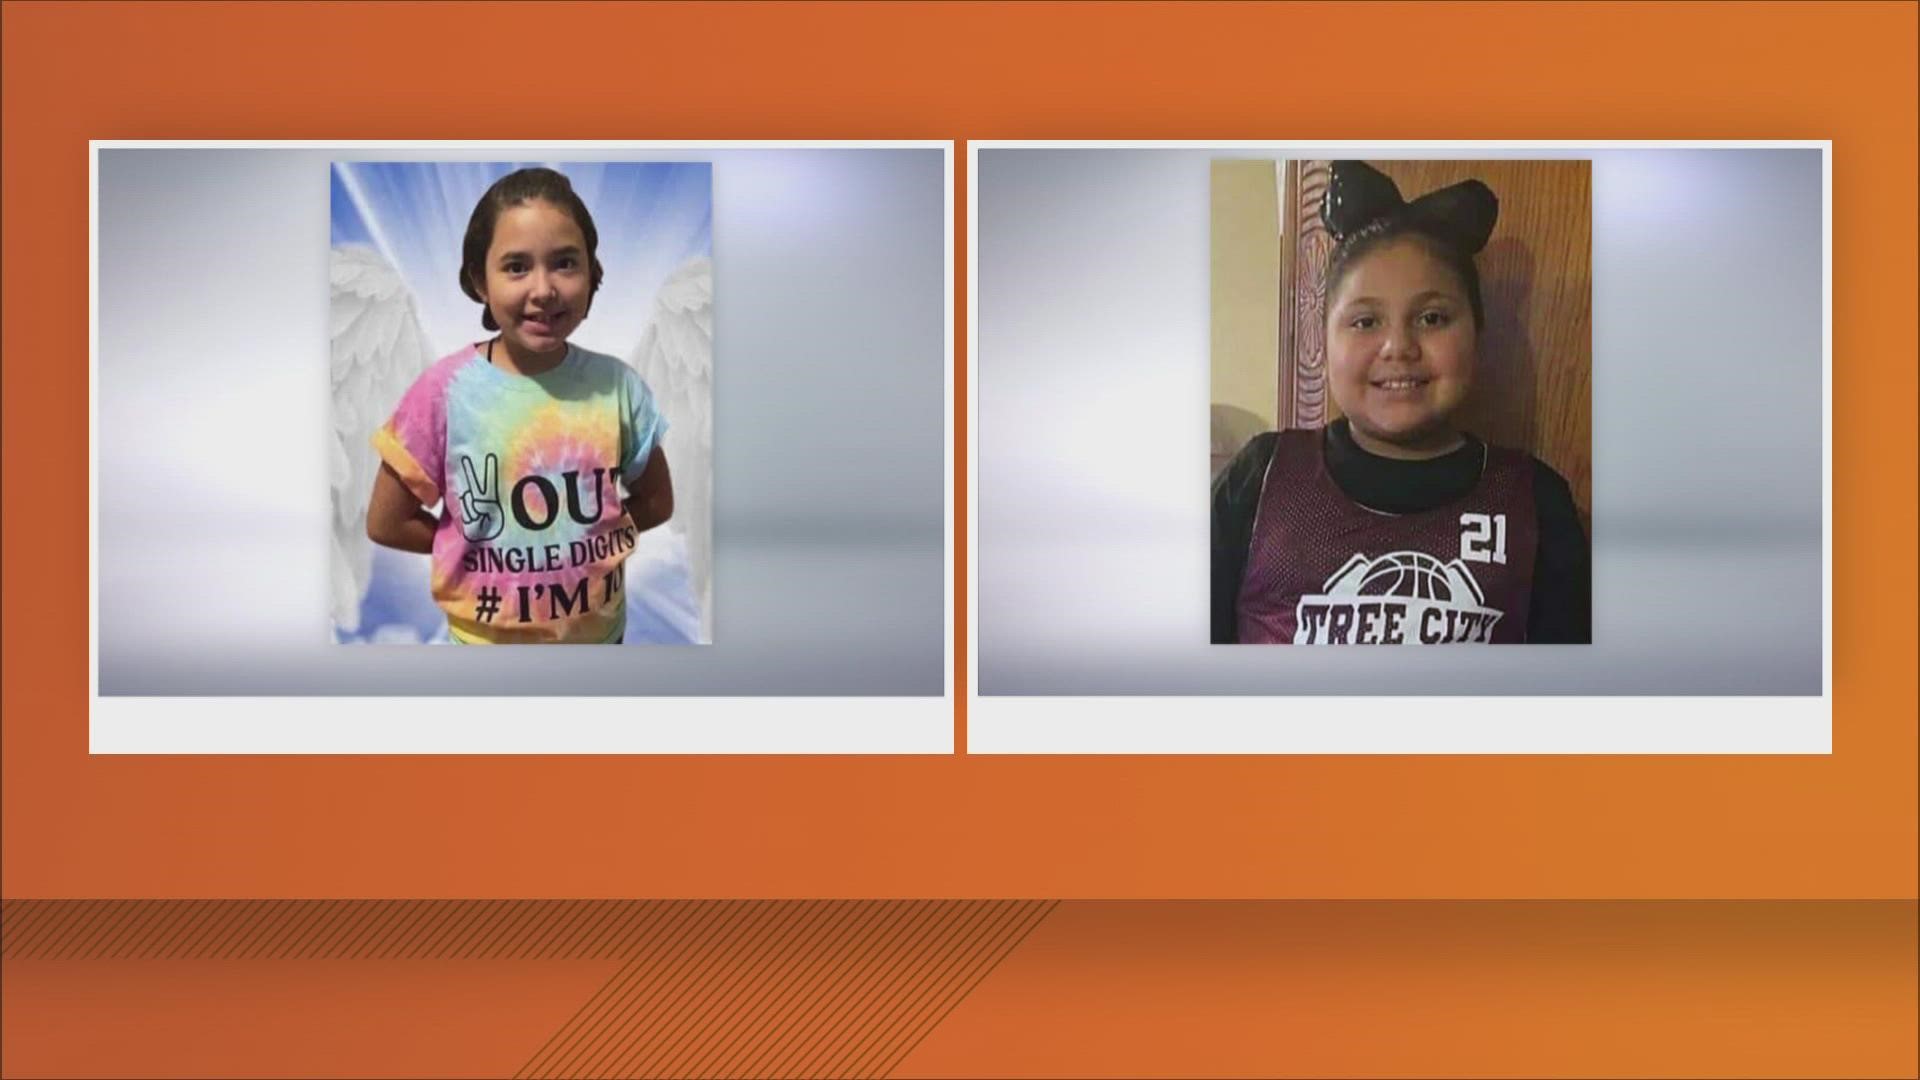 The community is in mourning of the 19 children and two teachers killed at Robb Elementary.